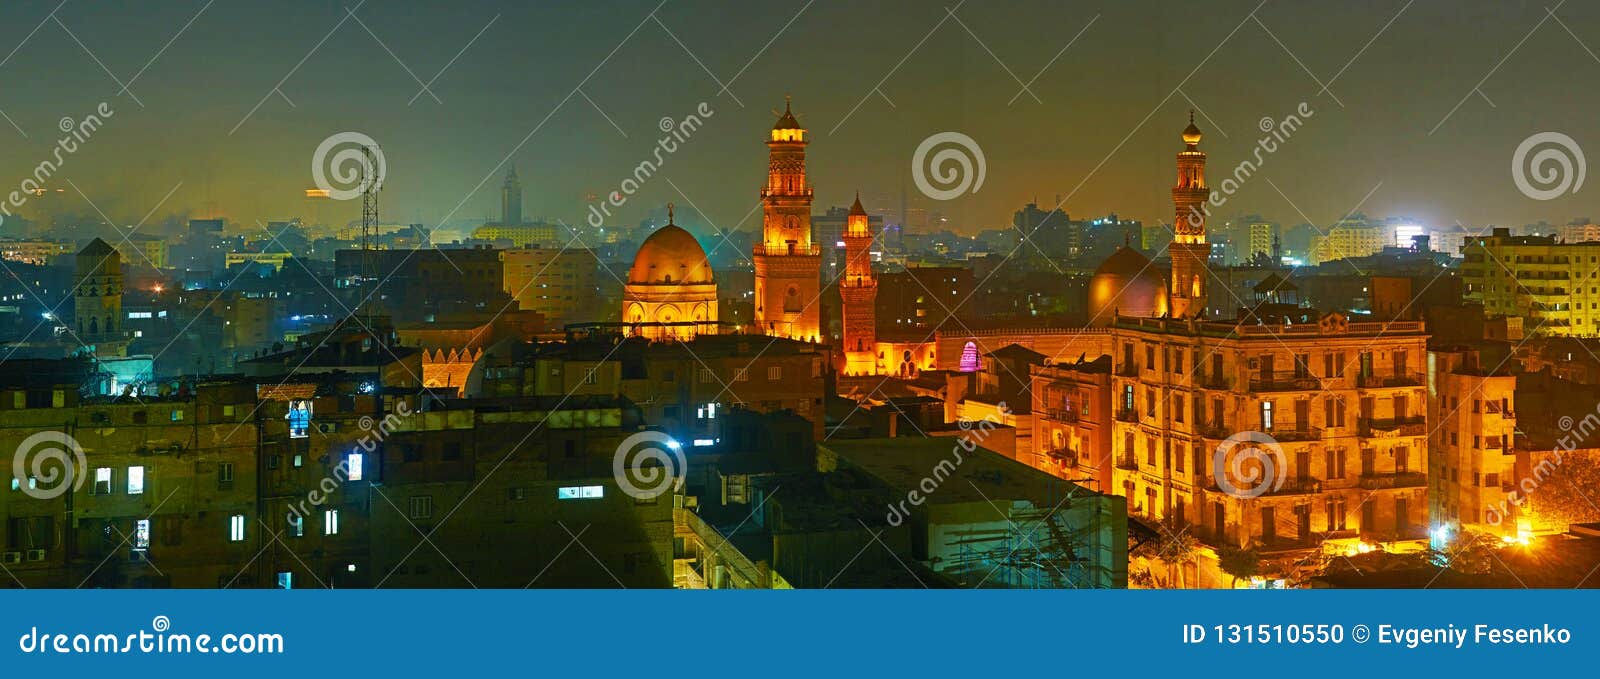 the foggy evening in islamic cairo with a view on medieval minarets and domes of sultan qalawun, al moez and elzaher barqooq